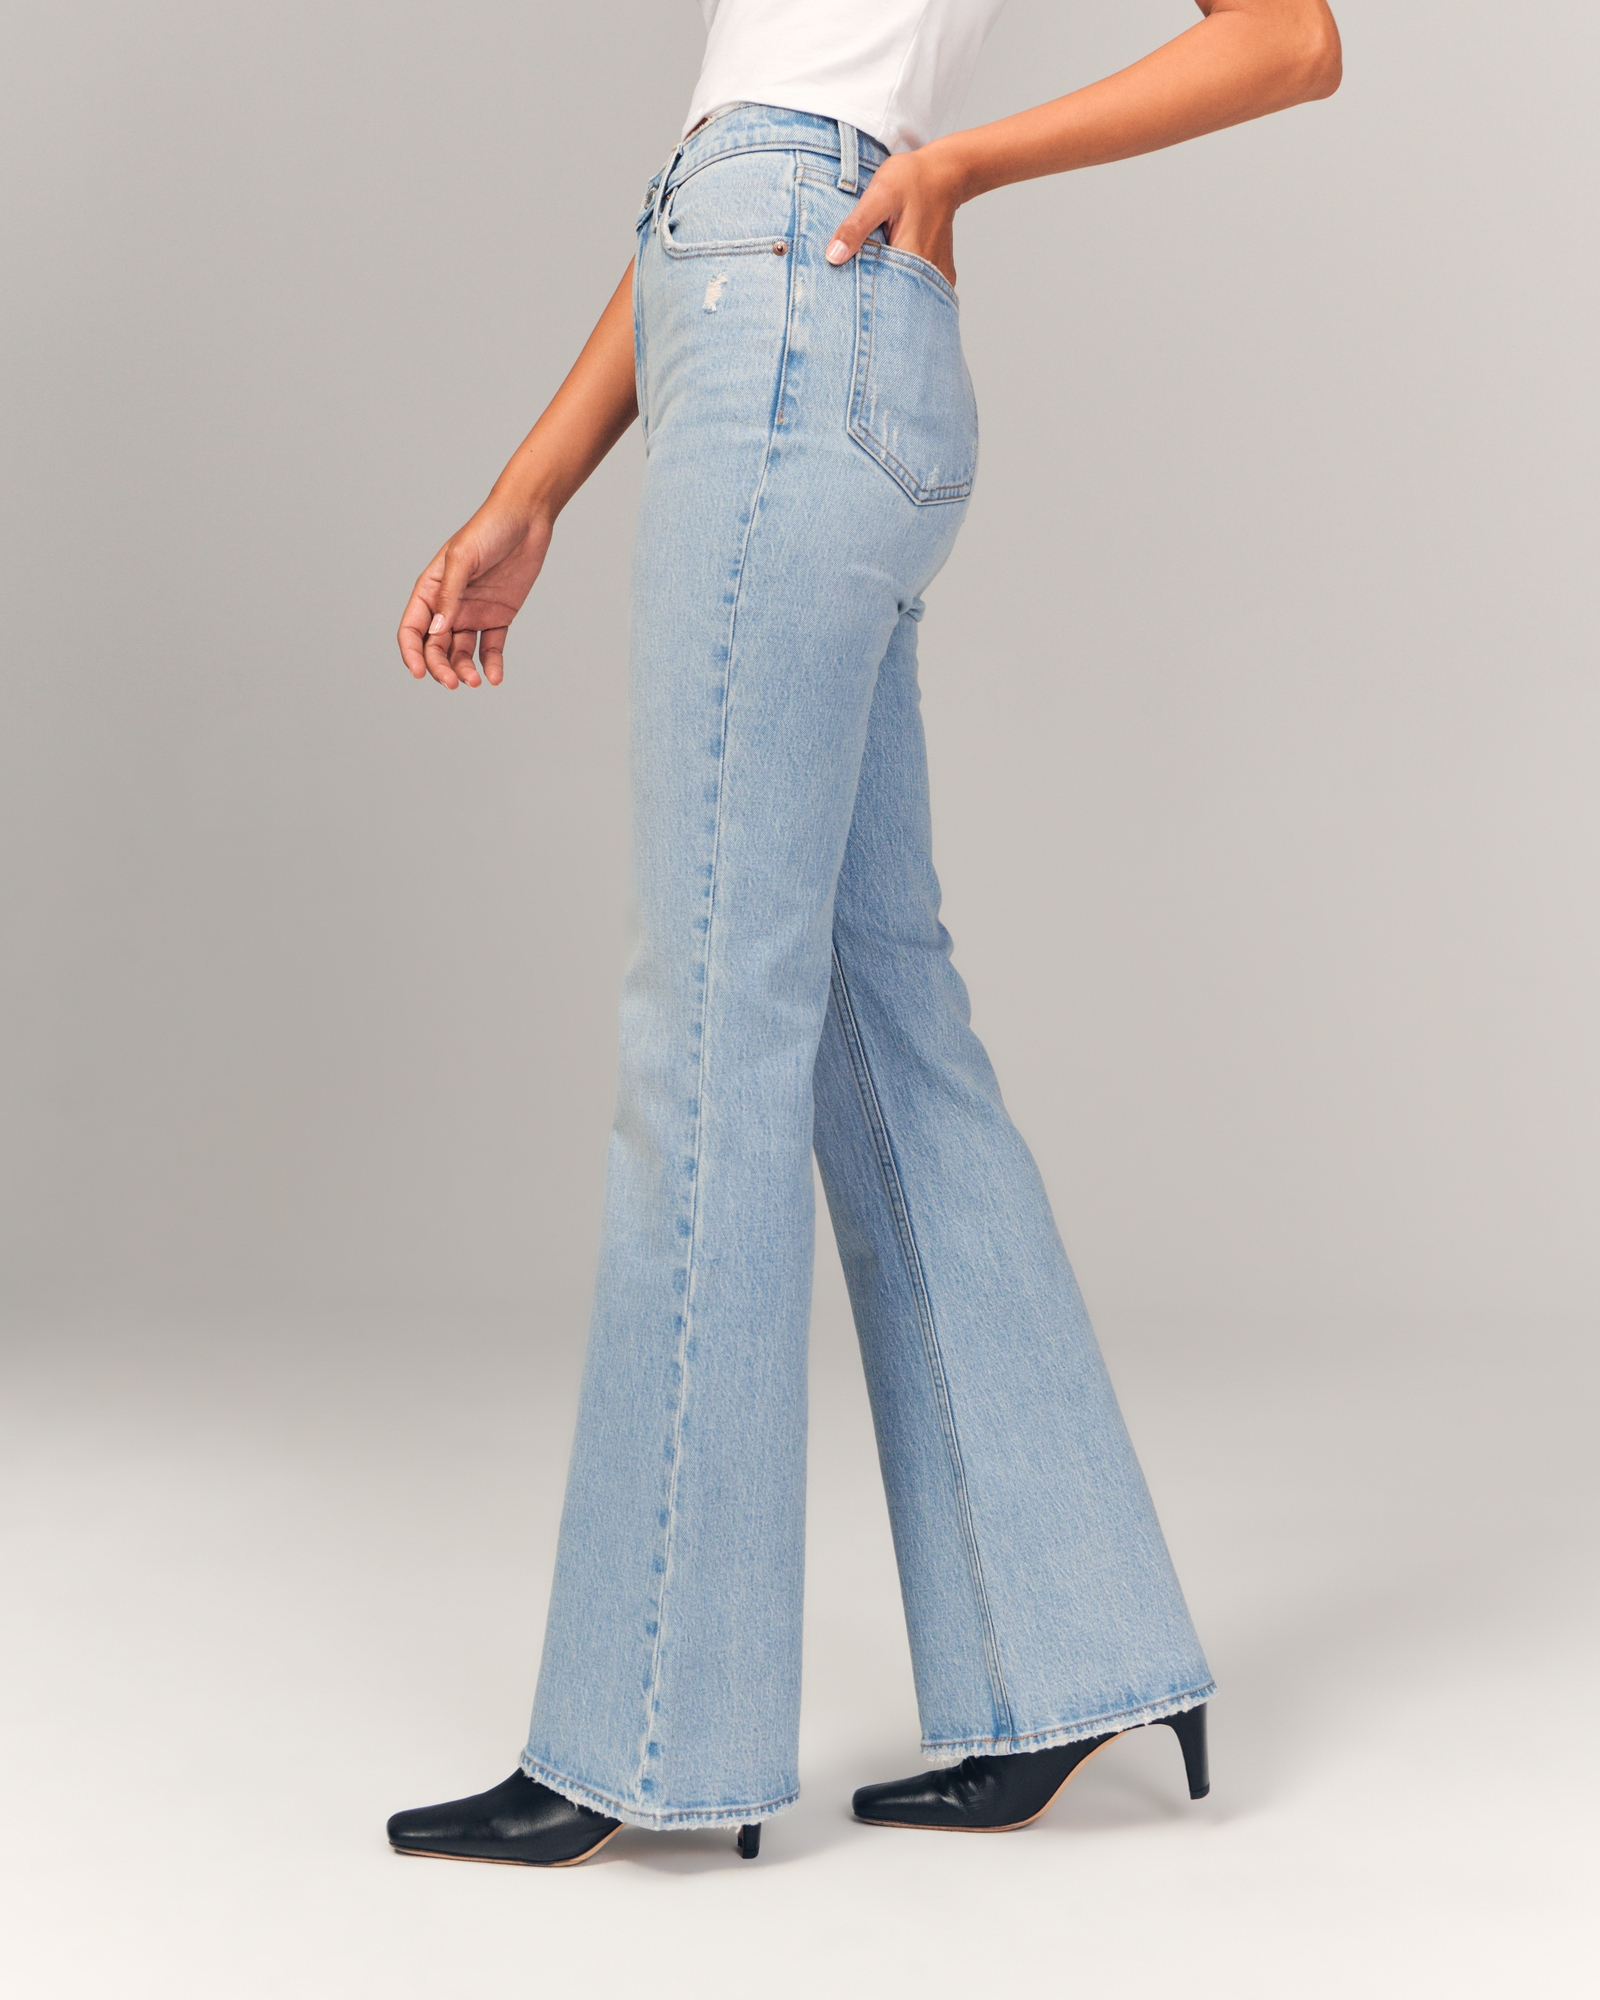 Vintage High Waisted Flare Jeans For Girls Skinny Y2K Ripped Denim Pants  With Harajuku Style Fashionable Womens Flared Trousers Women Capris 210510  From Cong03, $22.65